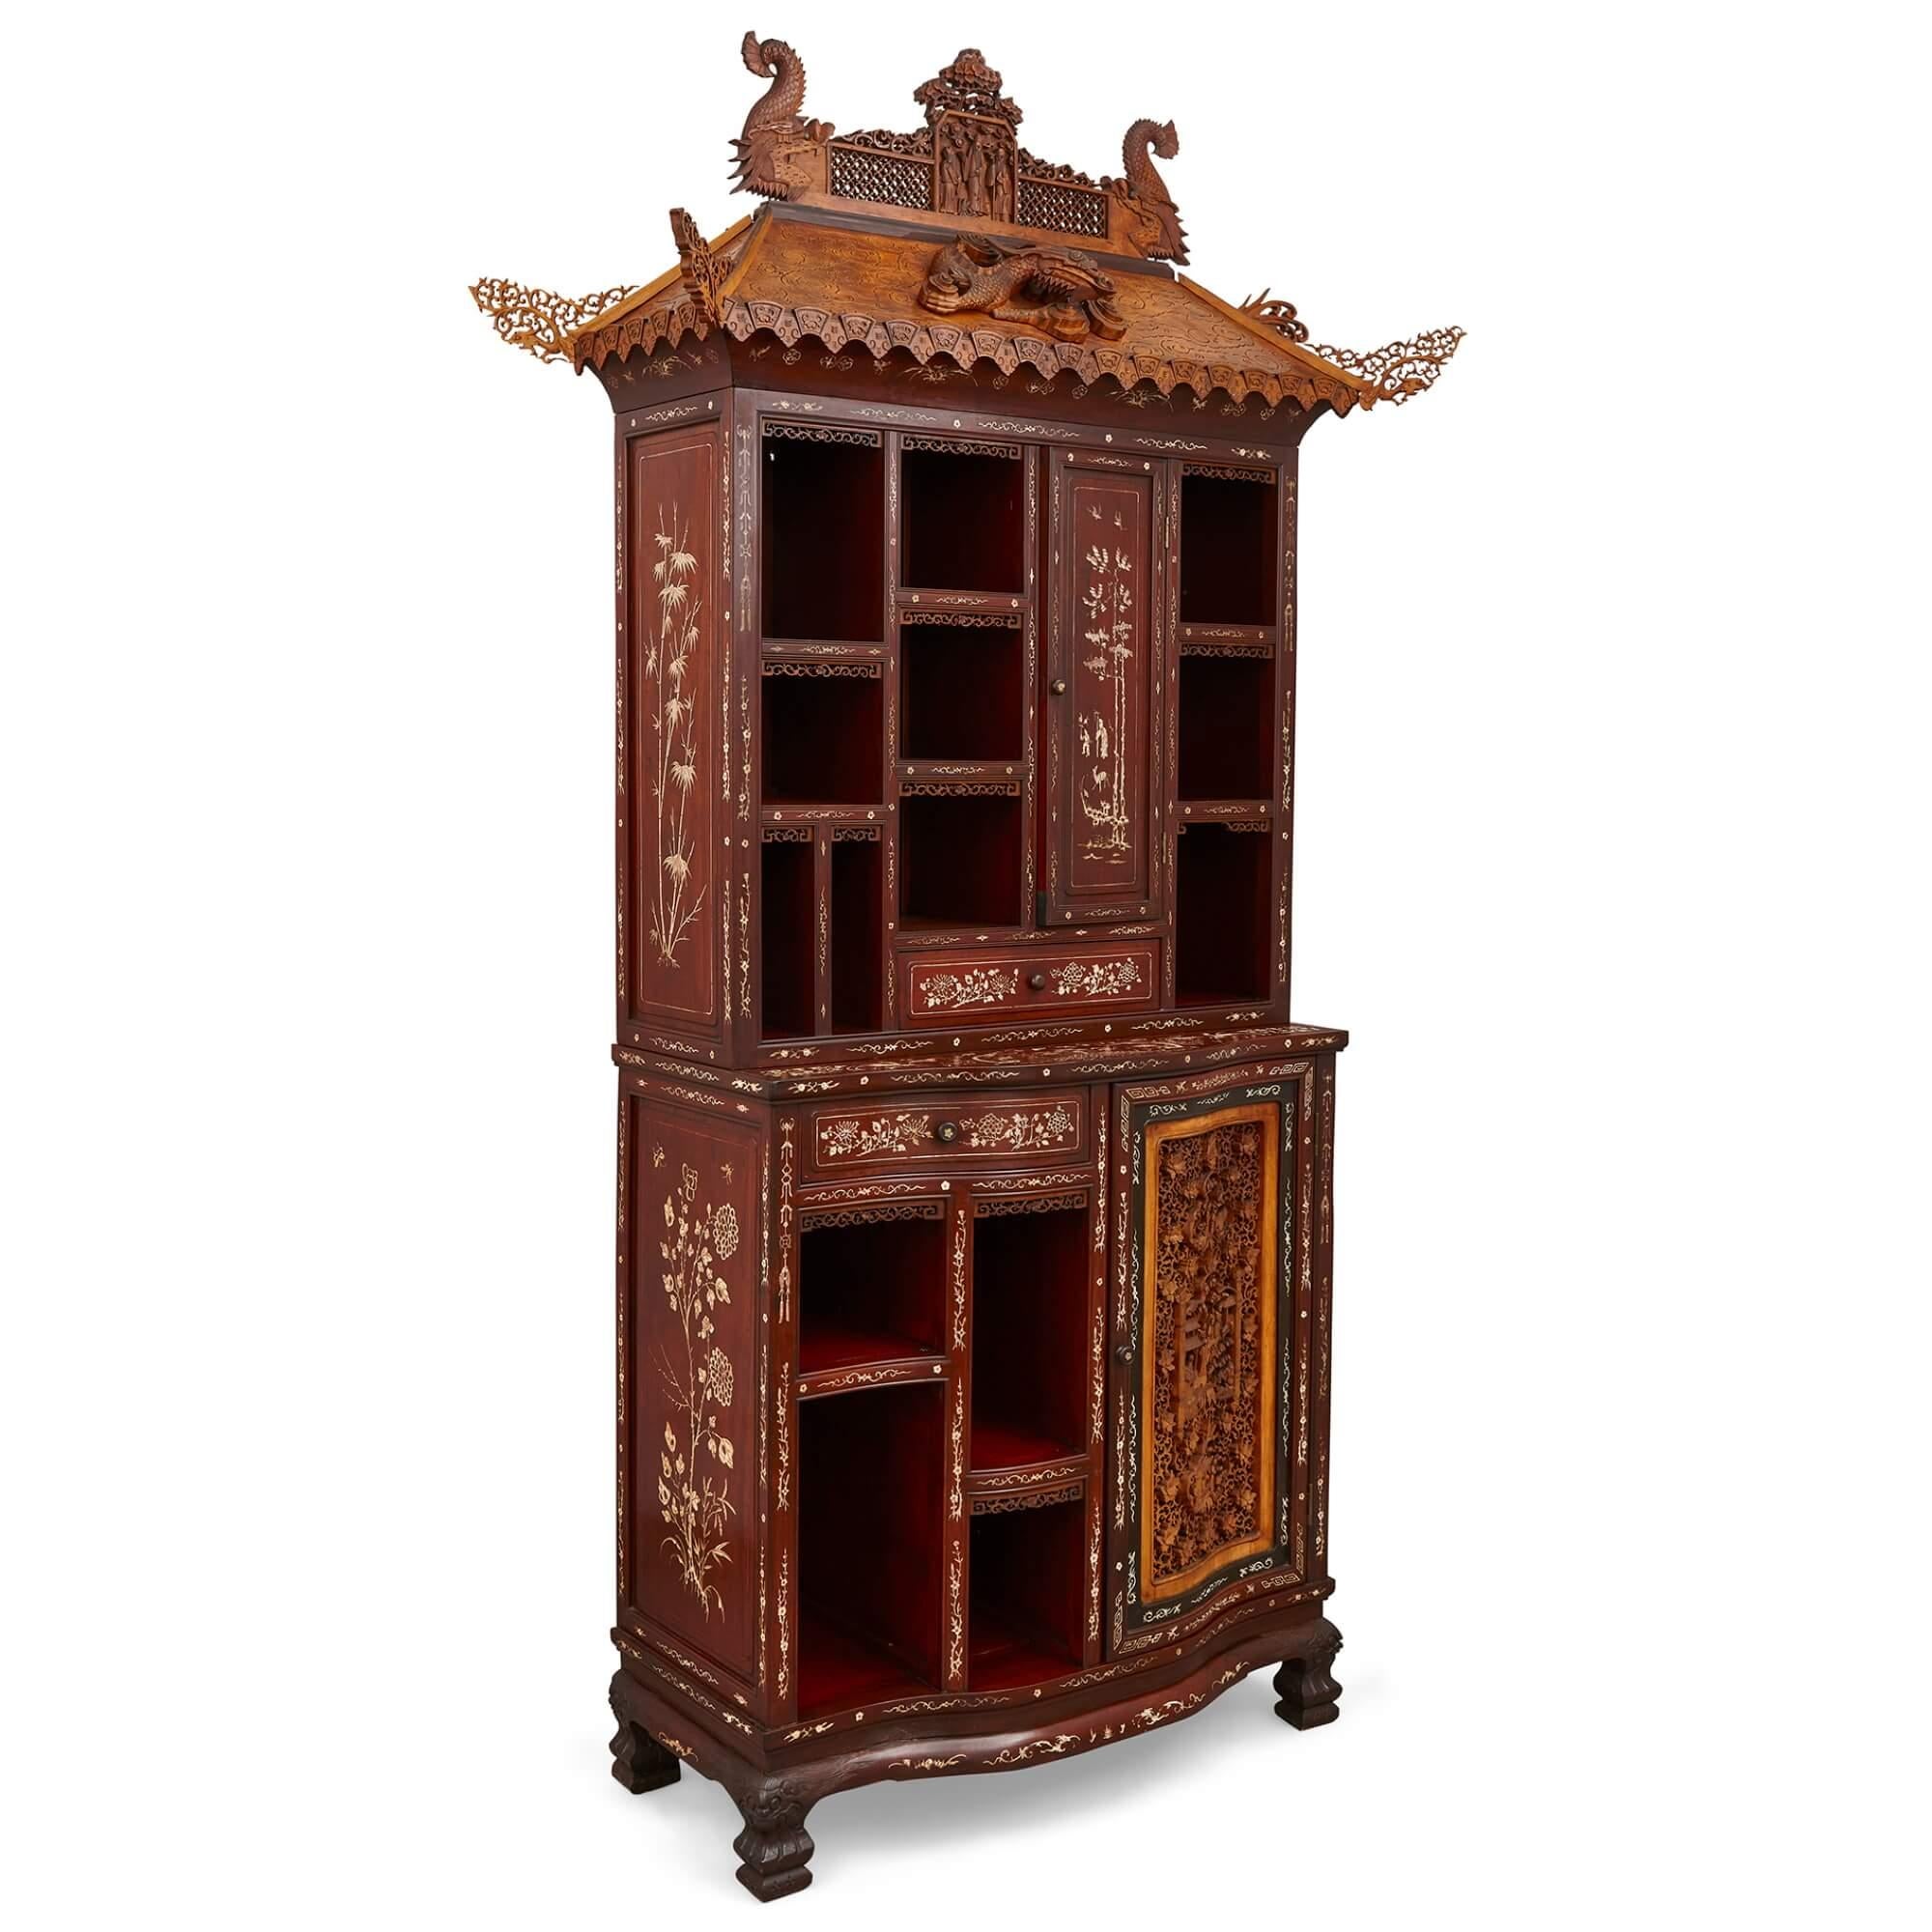 Large Bone-Inlaid Hardwood, Boxwood, and Ebony Chinese Cabinet
Chinese, Early 20th Century
Height 230cm, width 128cm, depth 55cm

Featuring a pierced and carved door panel to the front, which depicts various interior scenes, and set among rich,